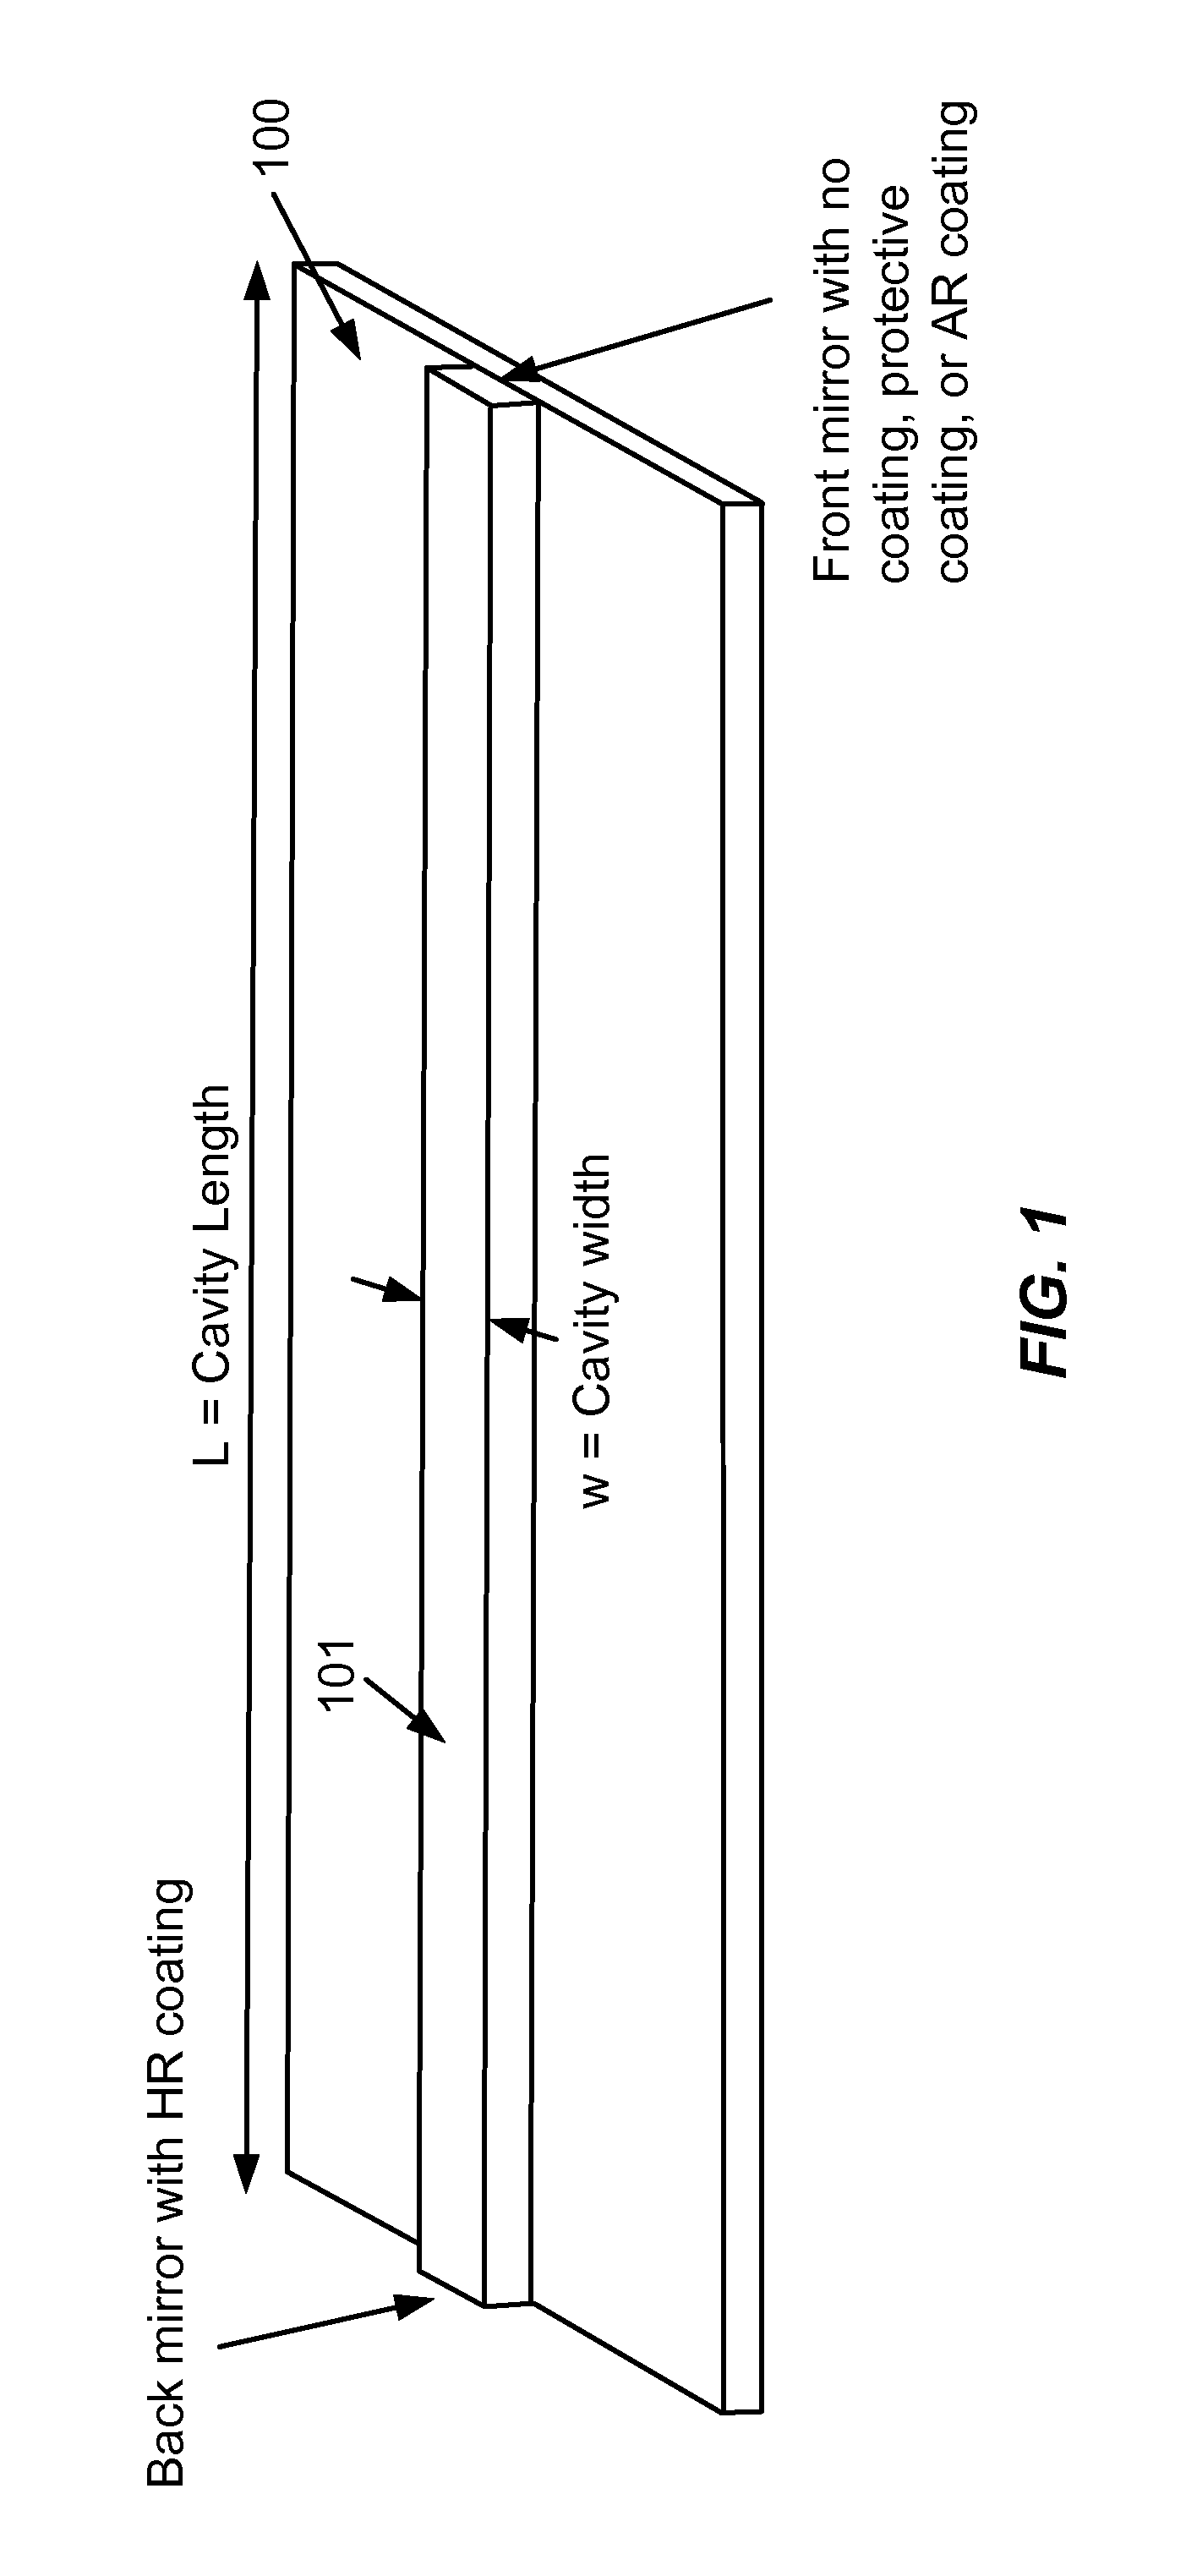 Laser Package Having Multiple Emitters Configured on a Substrate Member